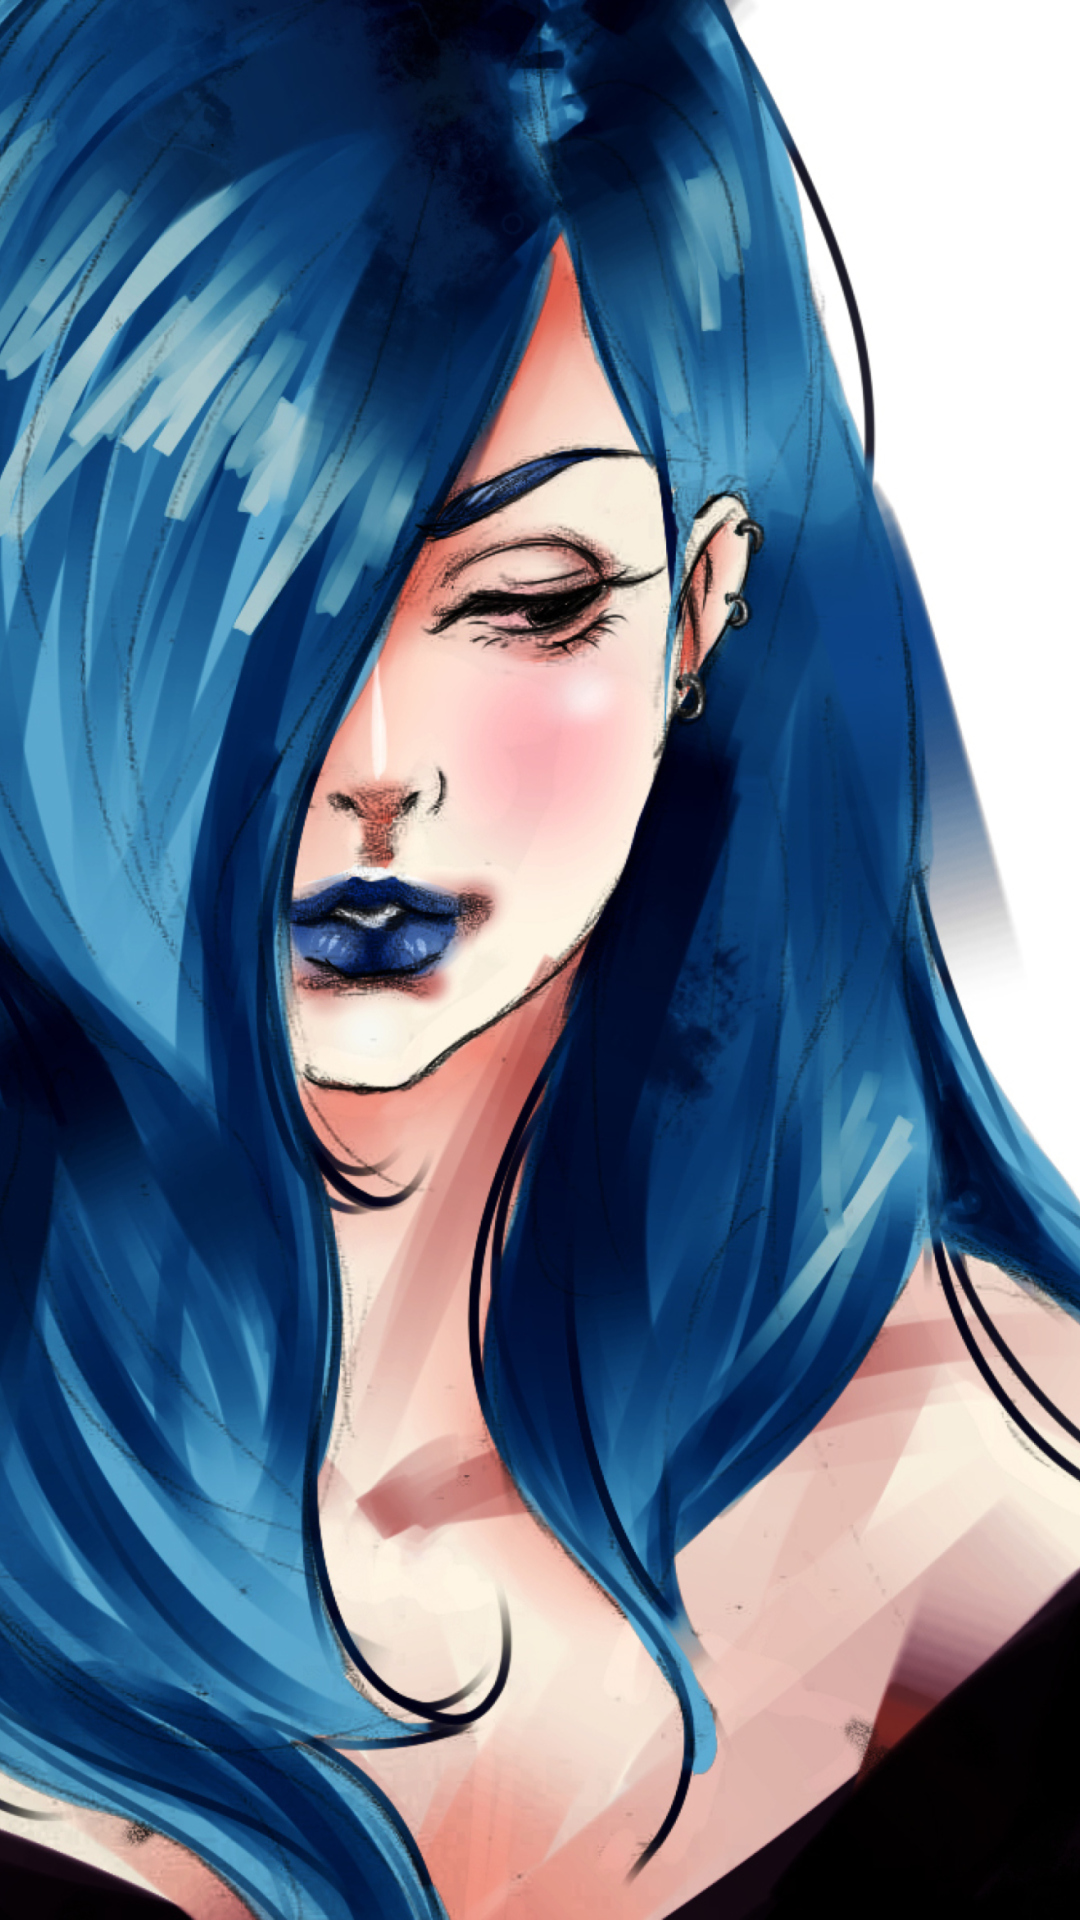 Girl With Blue Hair Painting wallpaper 1080x1920